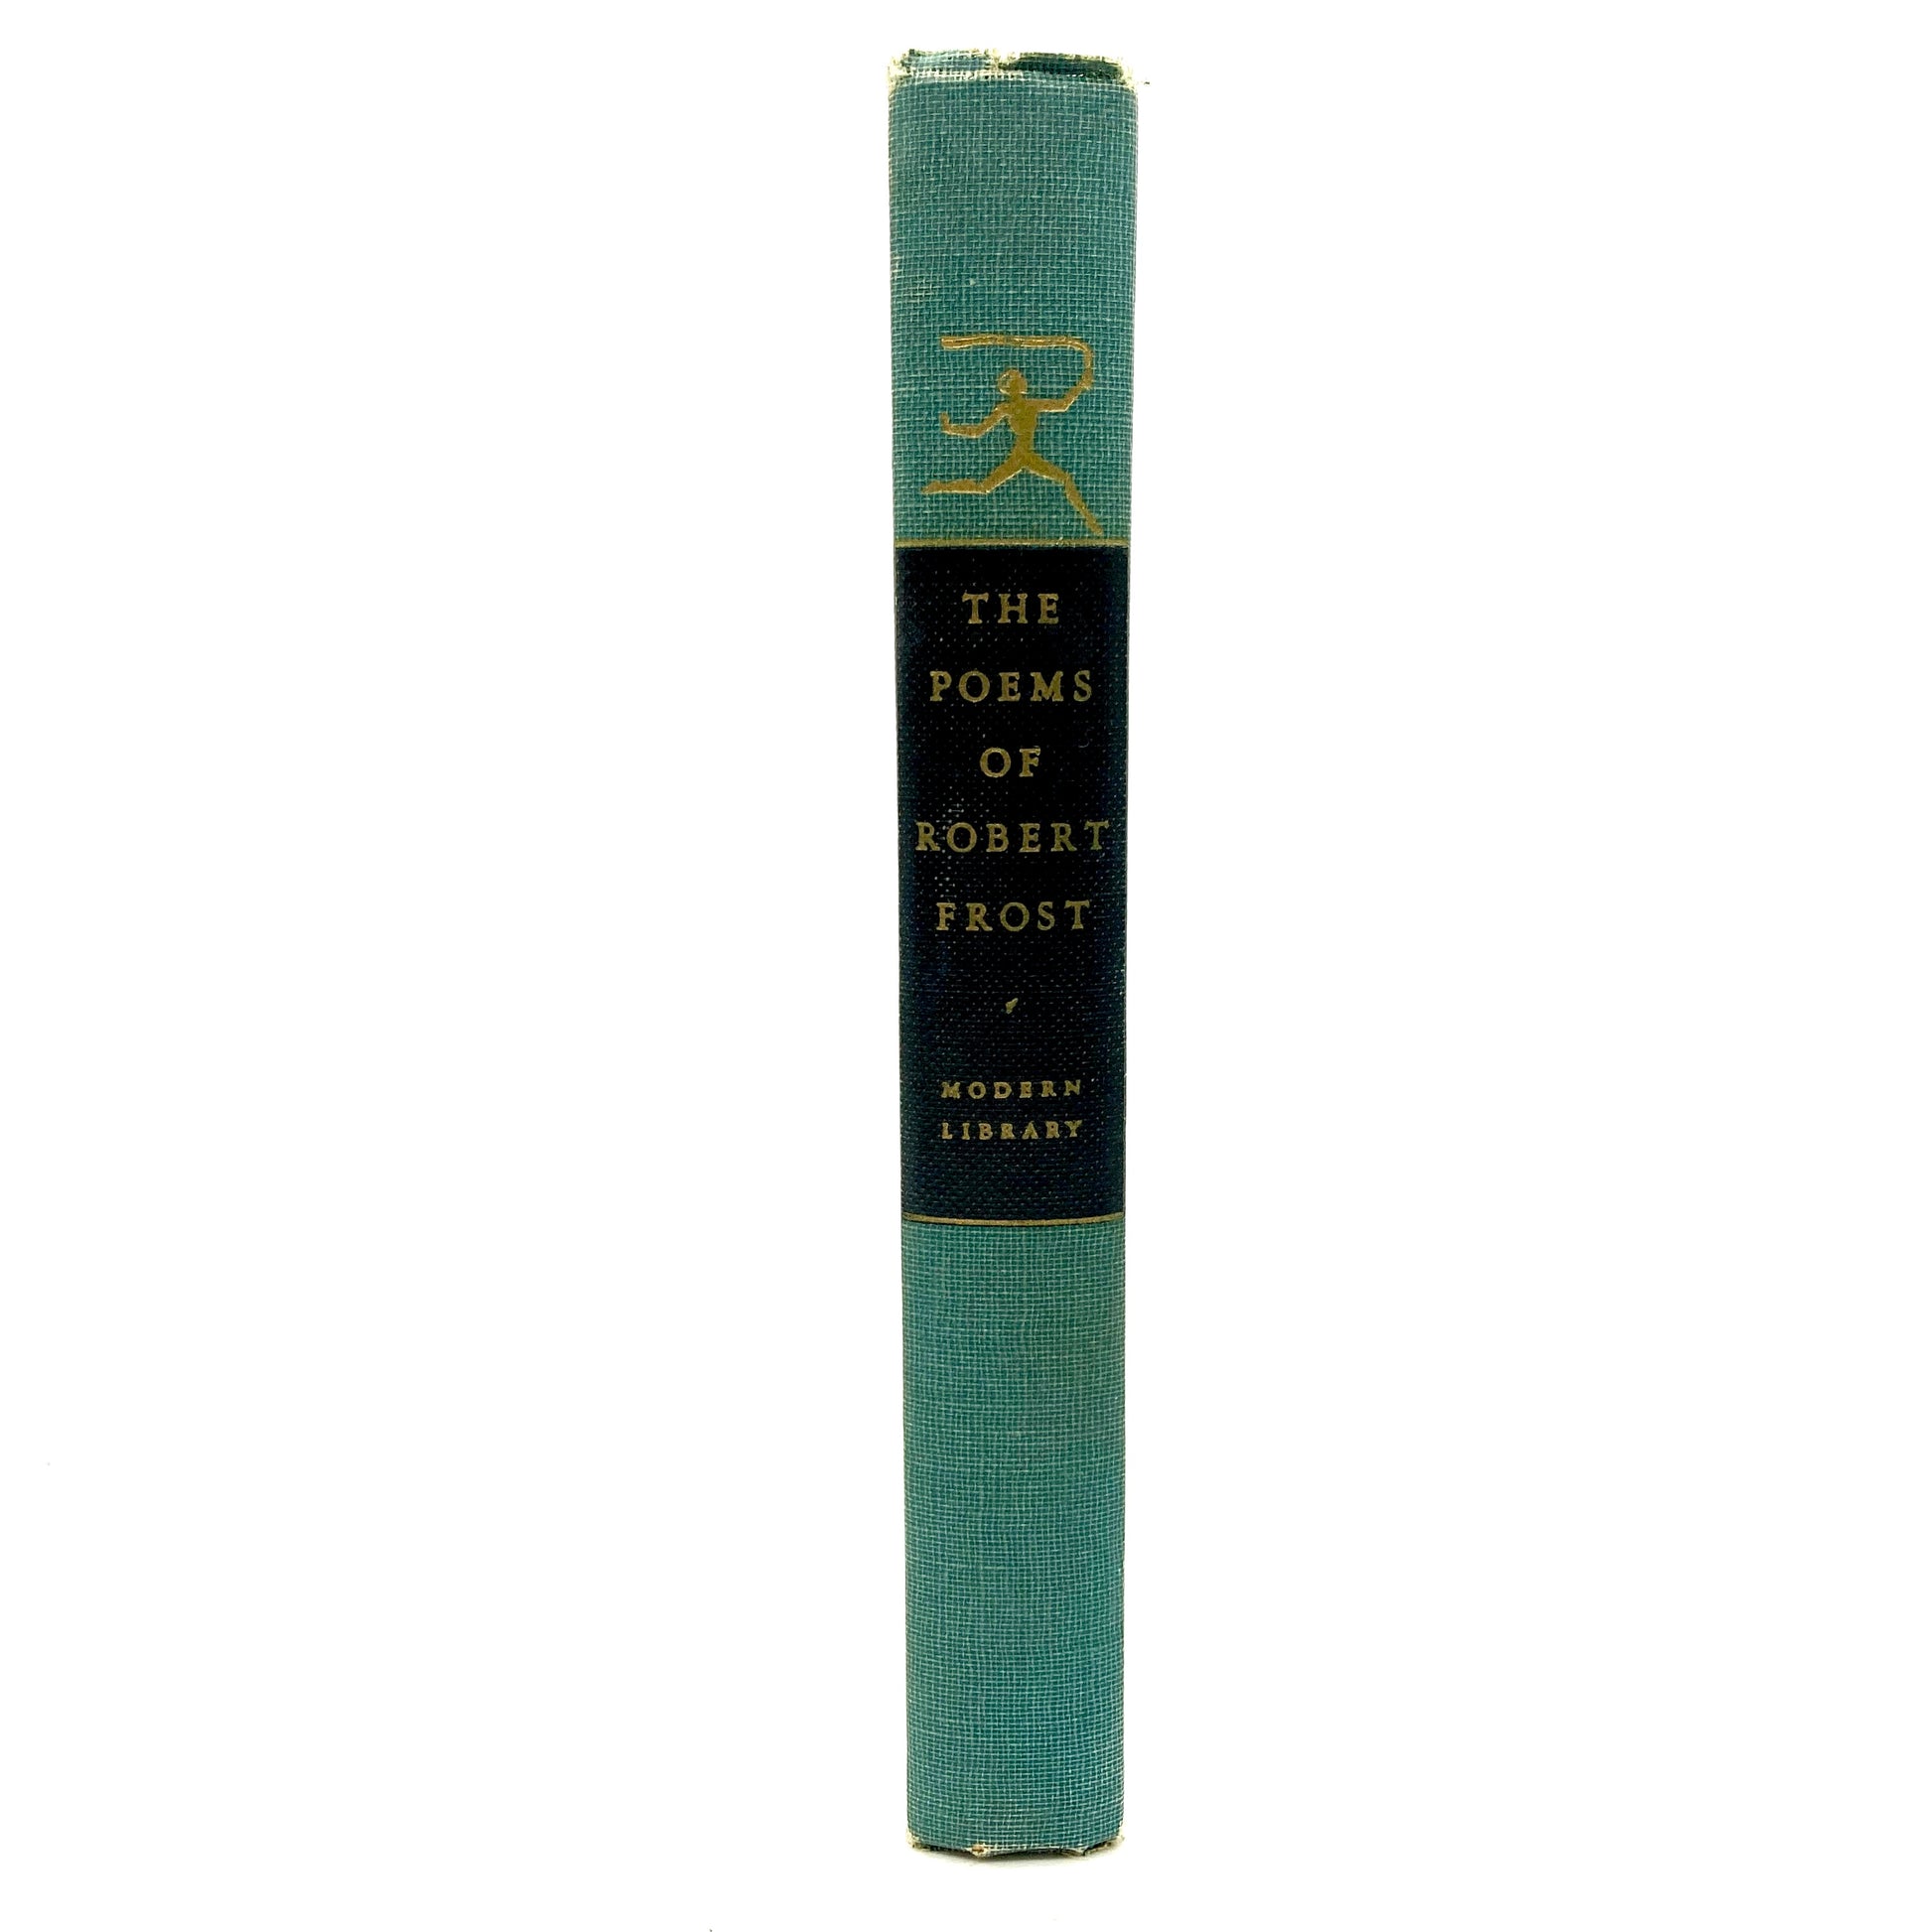 FROST, Robert "The Poems of Robert Frost" [Modern Library, 1946] - Buzz Bookstore